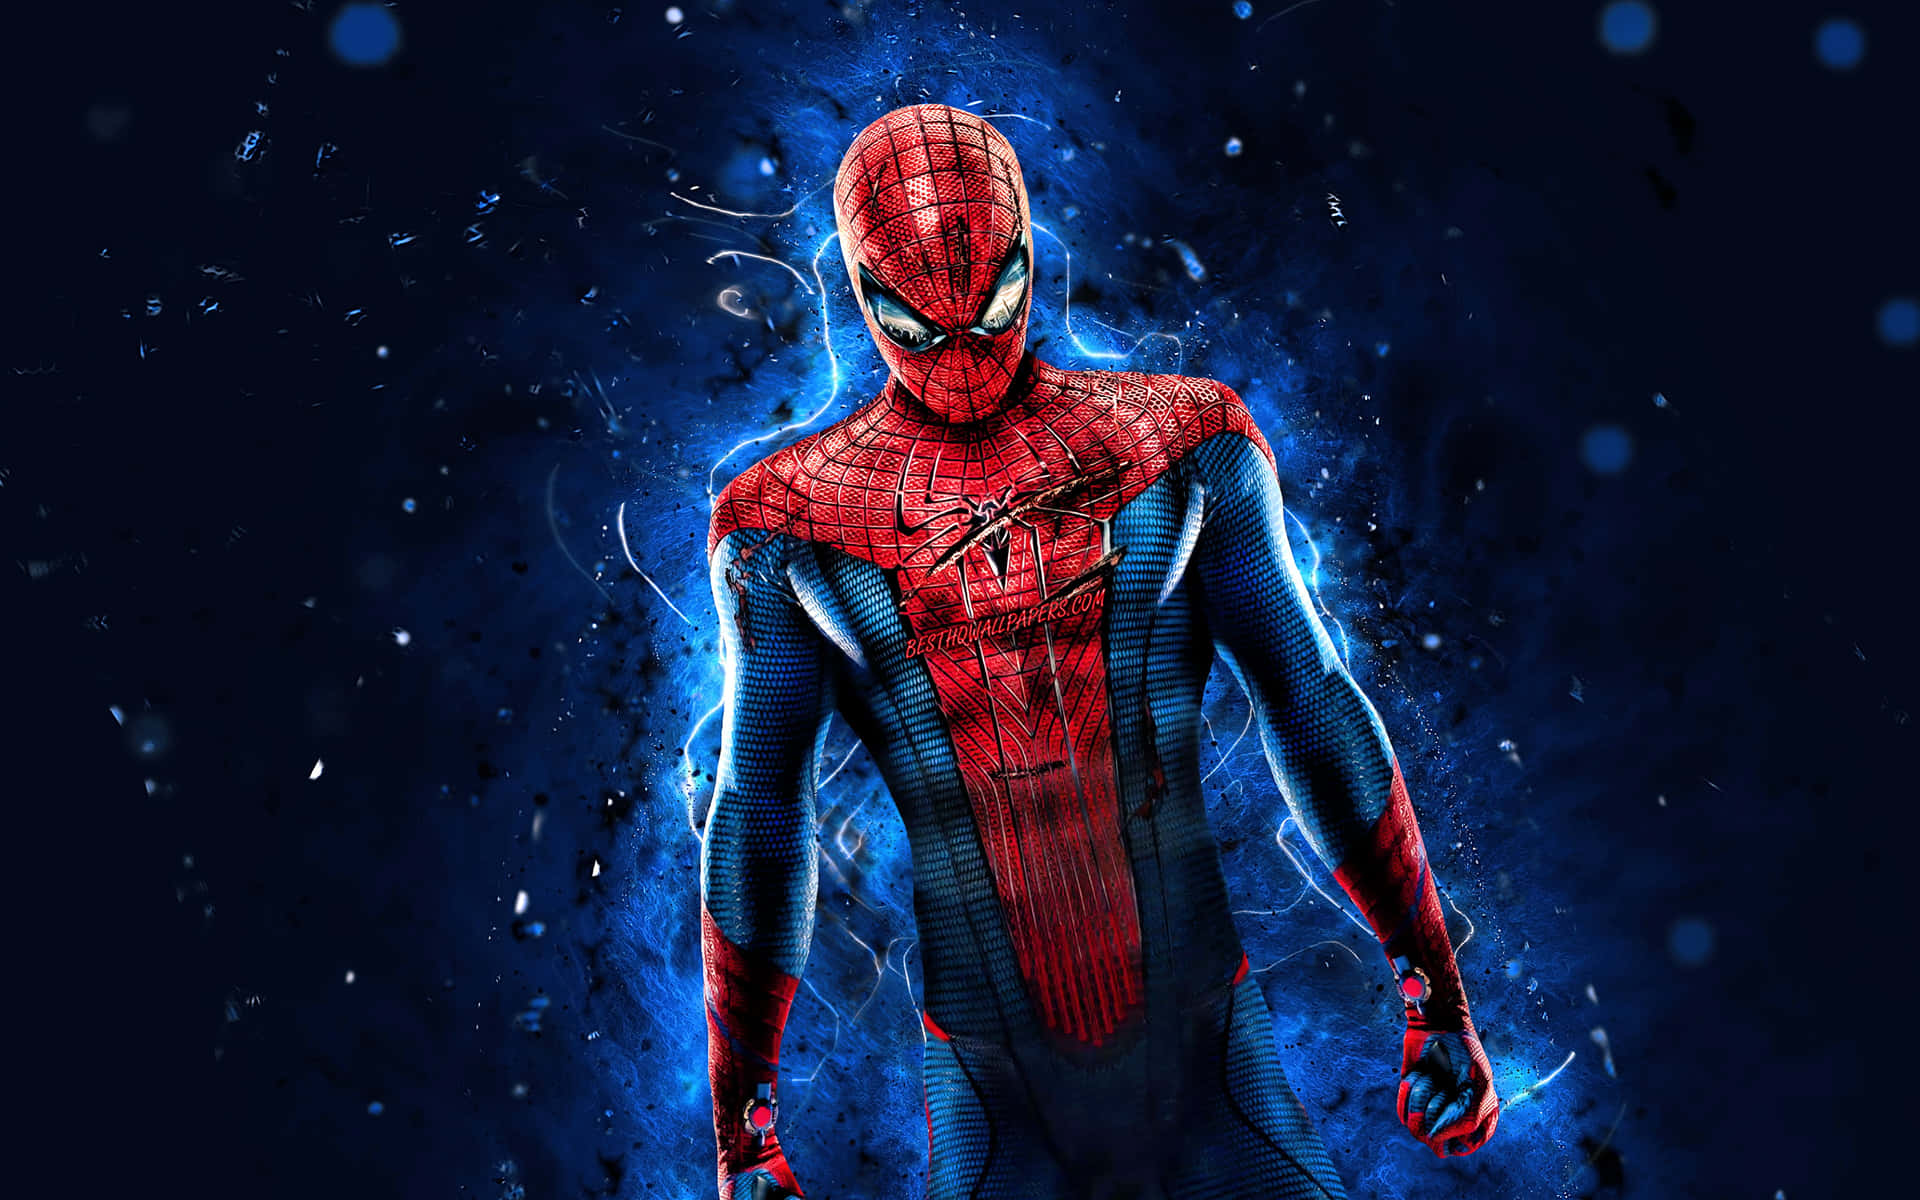 Spider-Man Blue leaps into action against the city background Wallpaper